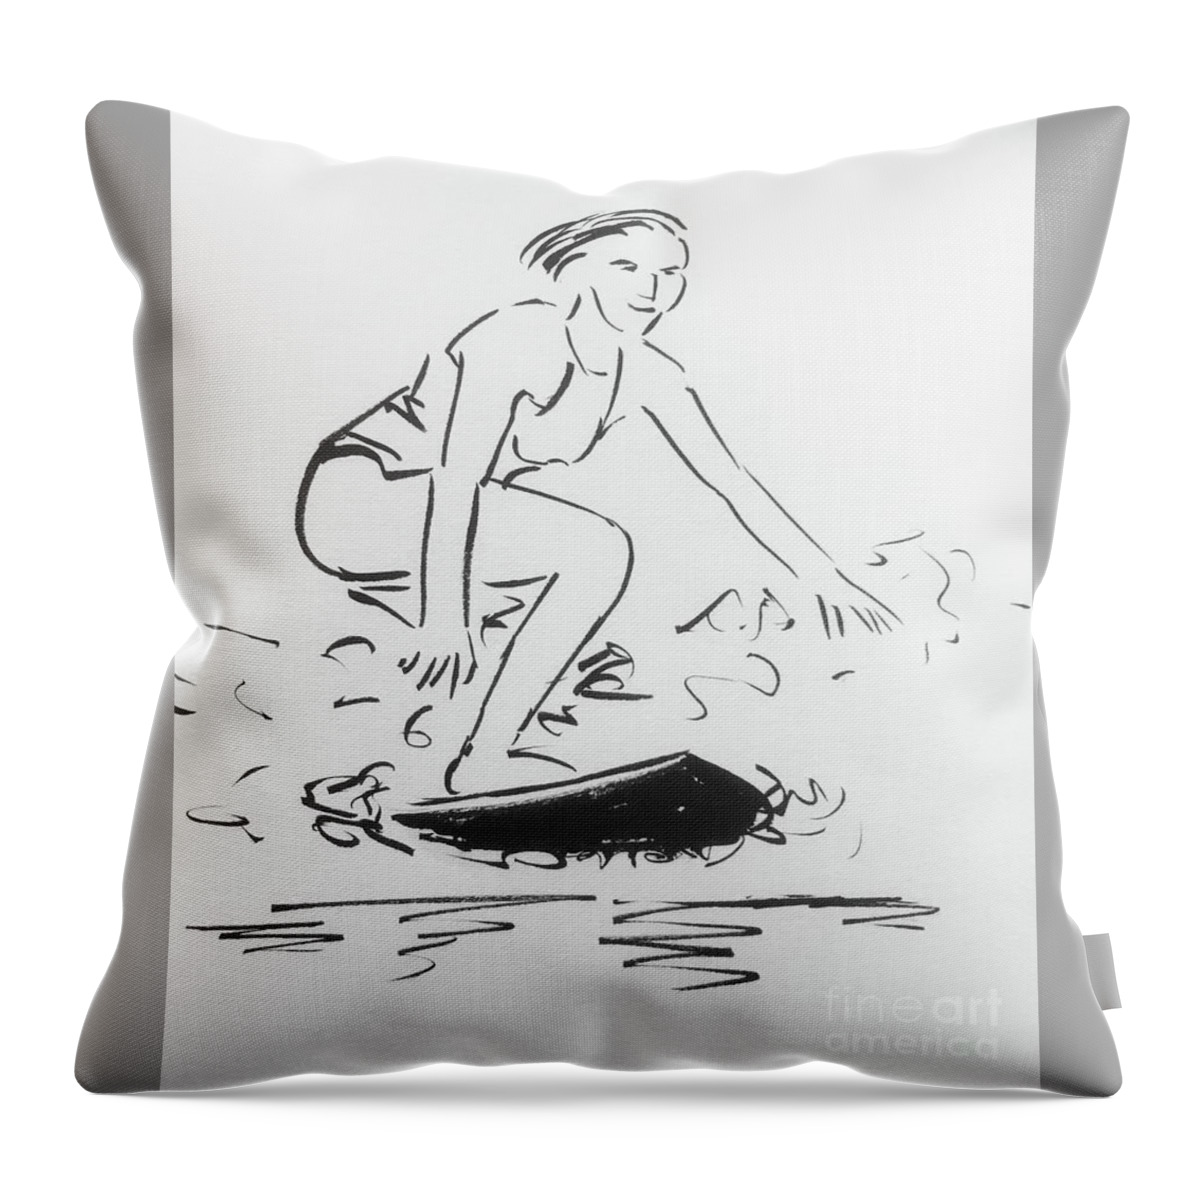 Surfing. Girl Surfing Throw Pillow featuring the drawing Surfer Girl by Maxie Absell